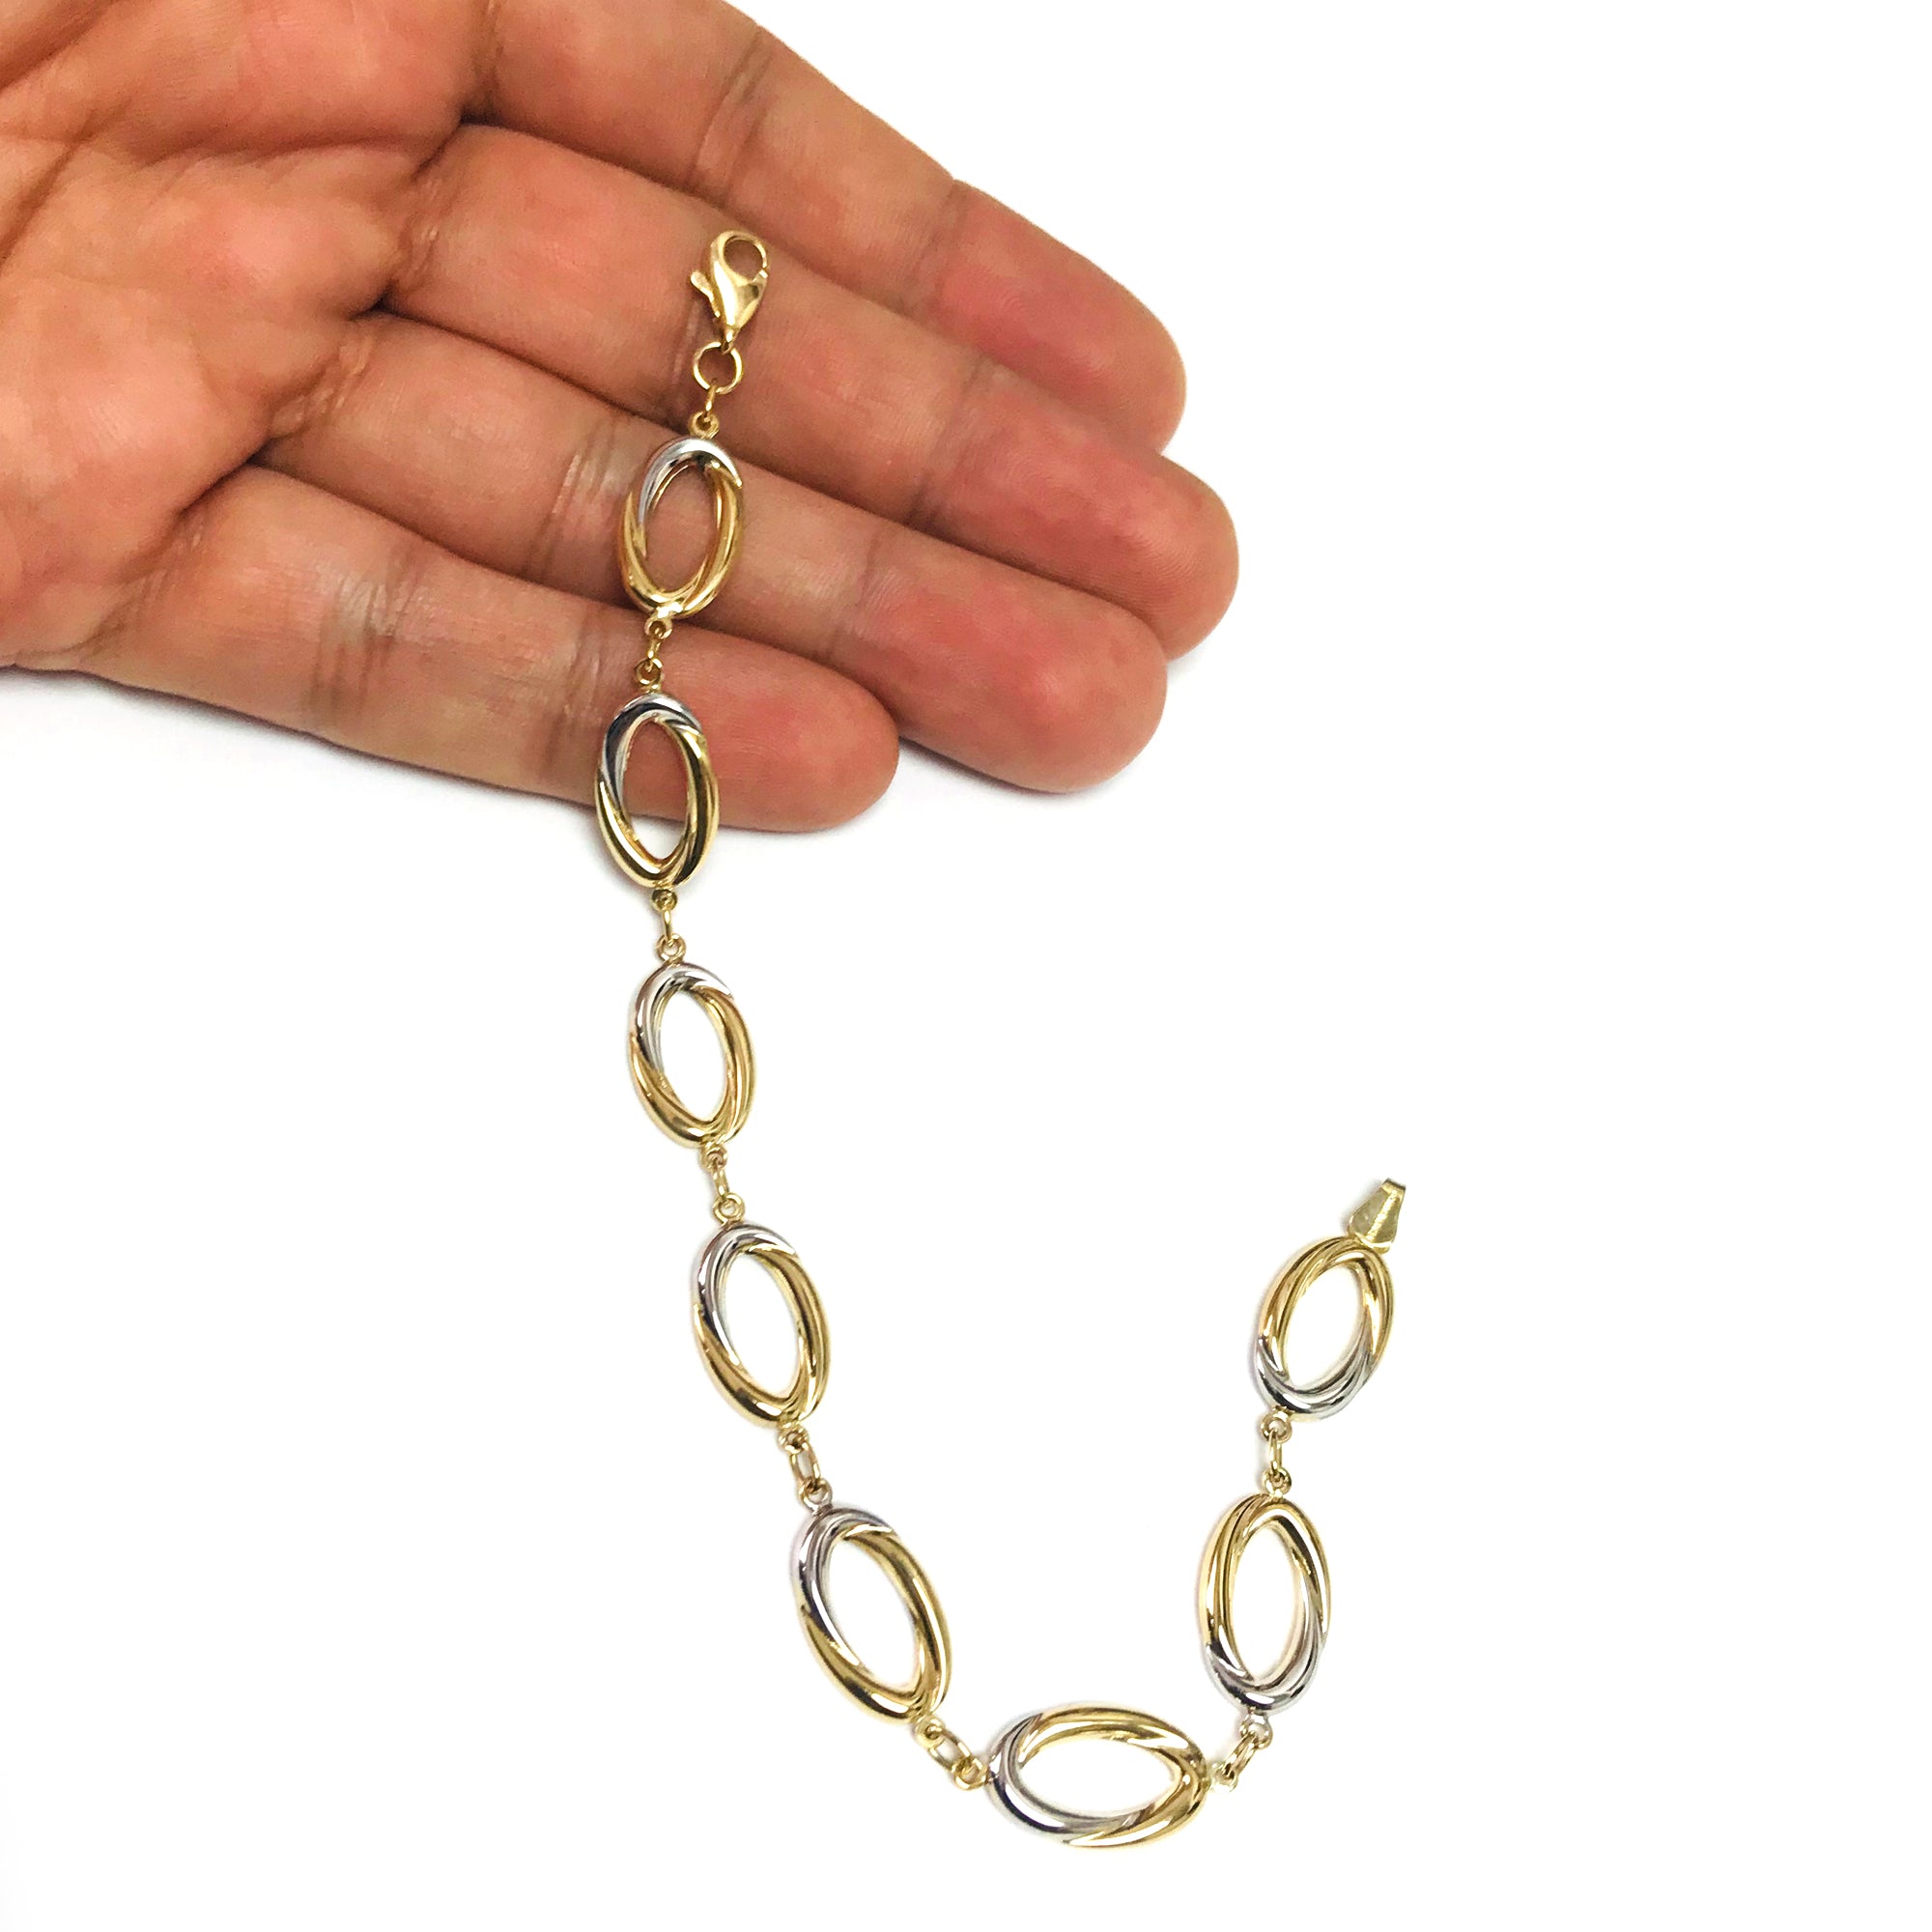 14k Yellow And White Gold Oval Links Bracelet, 7,5" fine designer jewelry for men and women